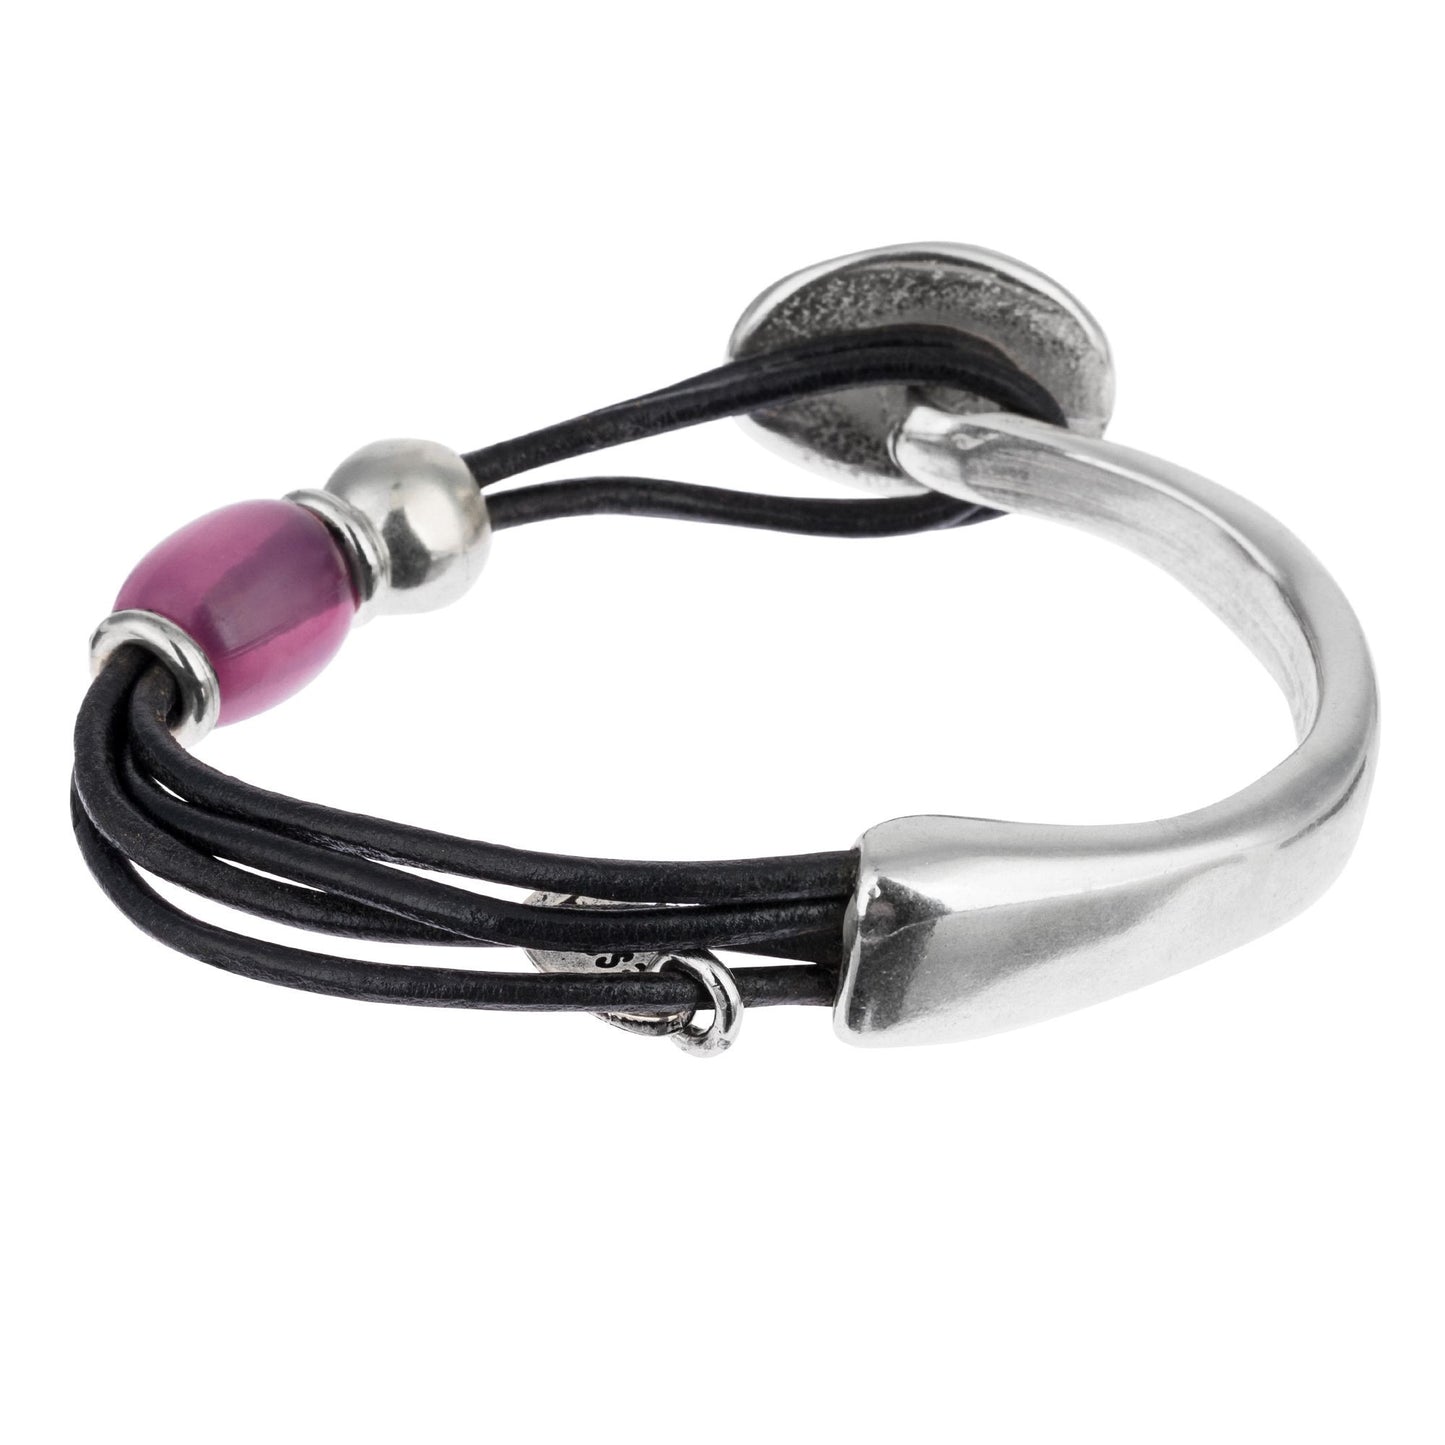 Black leather and silver plated amethyst resin bracelet